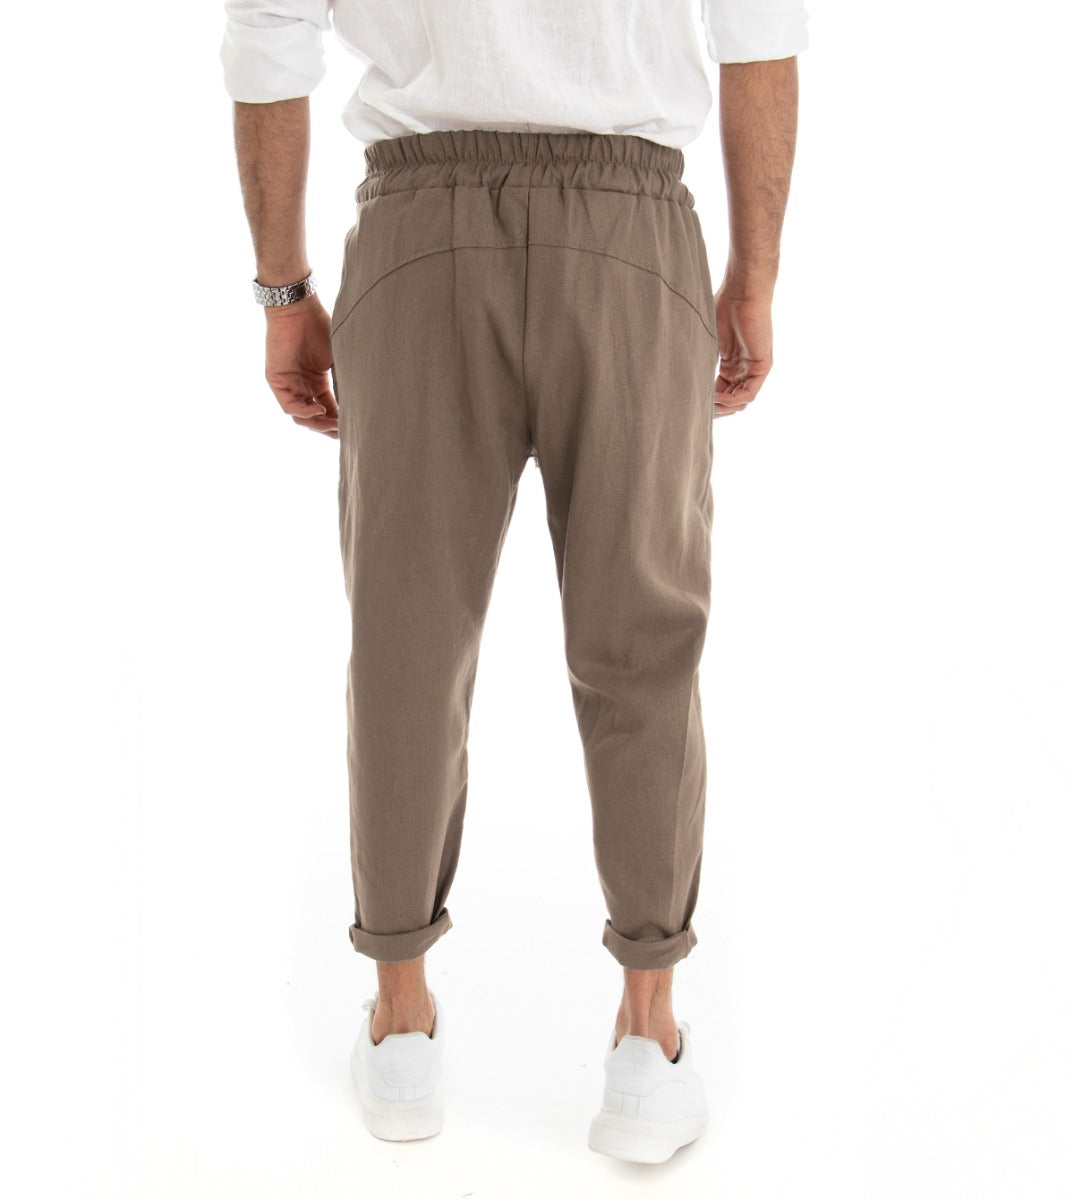 Men's Long Linen Solid Color Mud Trousers with America Pocket Elastic Drawstring GIOSAL